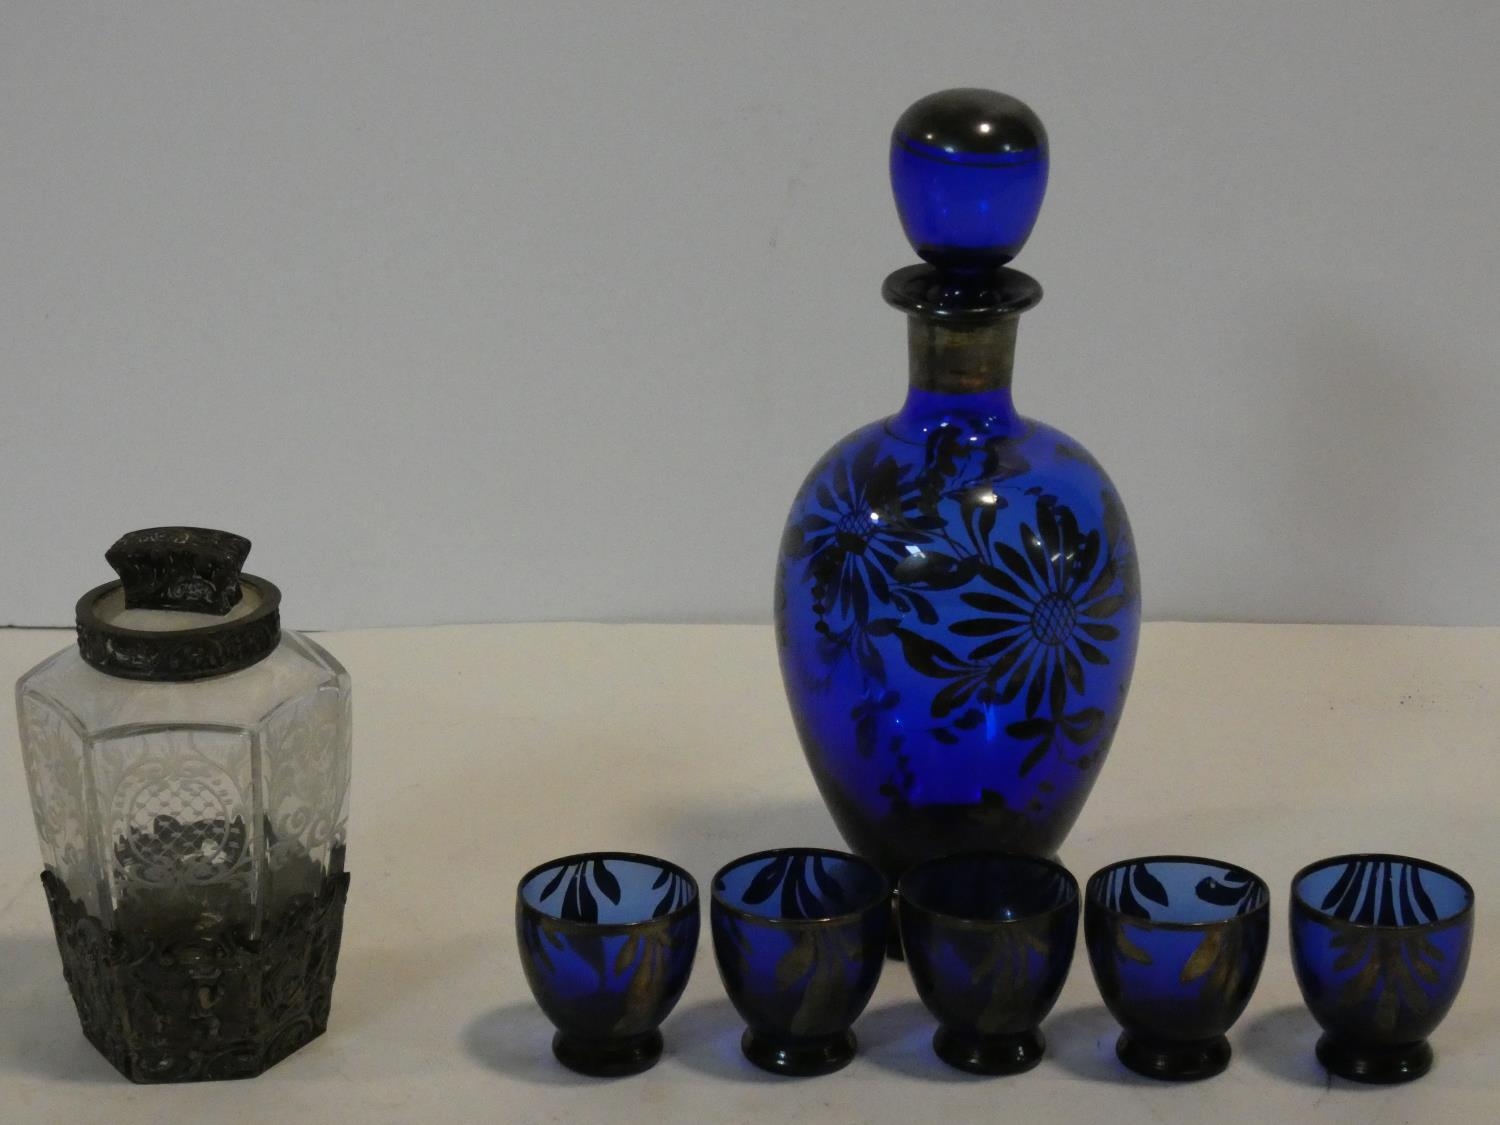 A cobalt blue glass decanter and shot glasses with painted silver floral design along with a